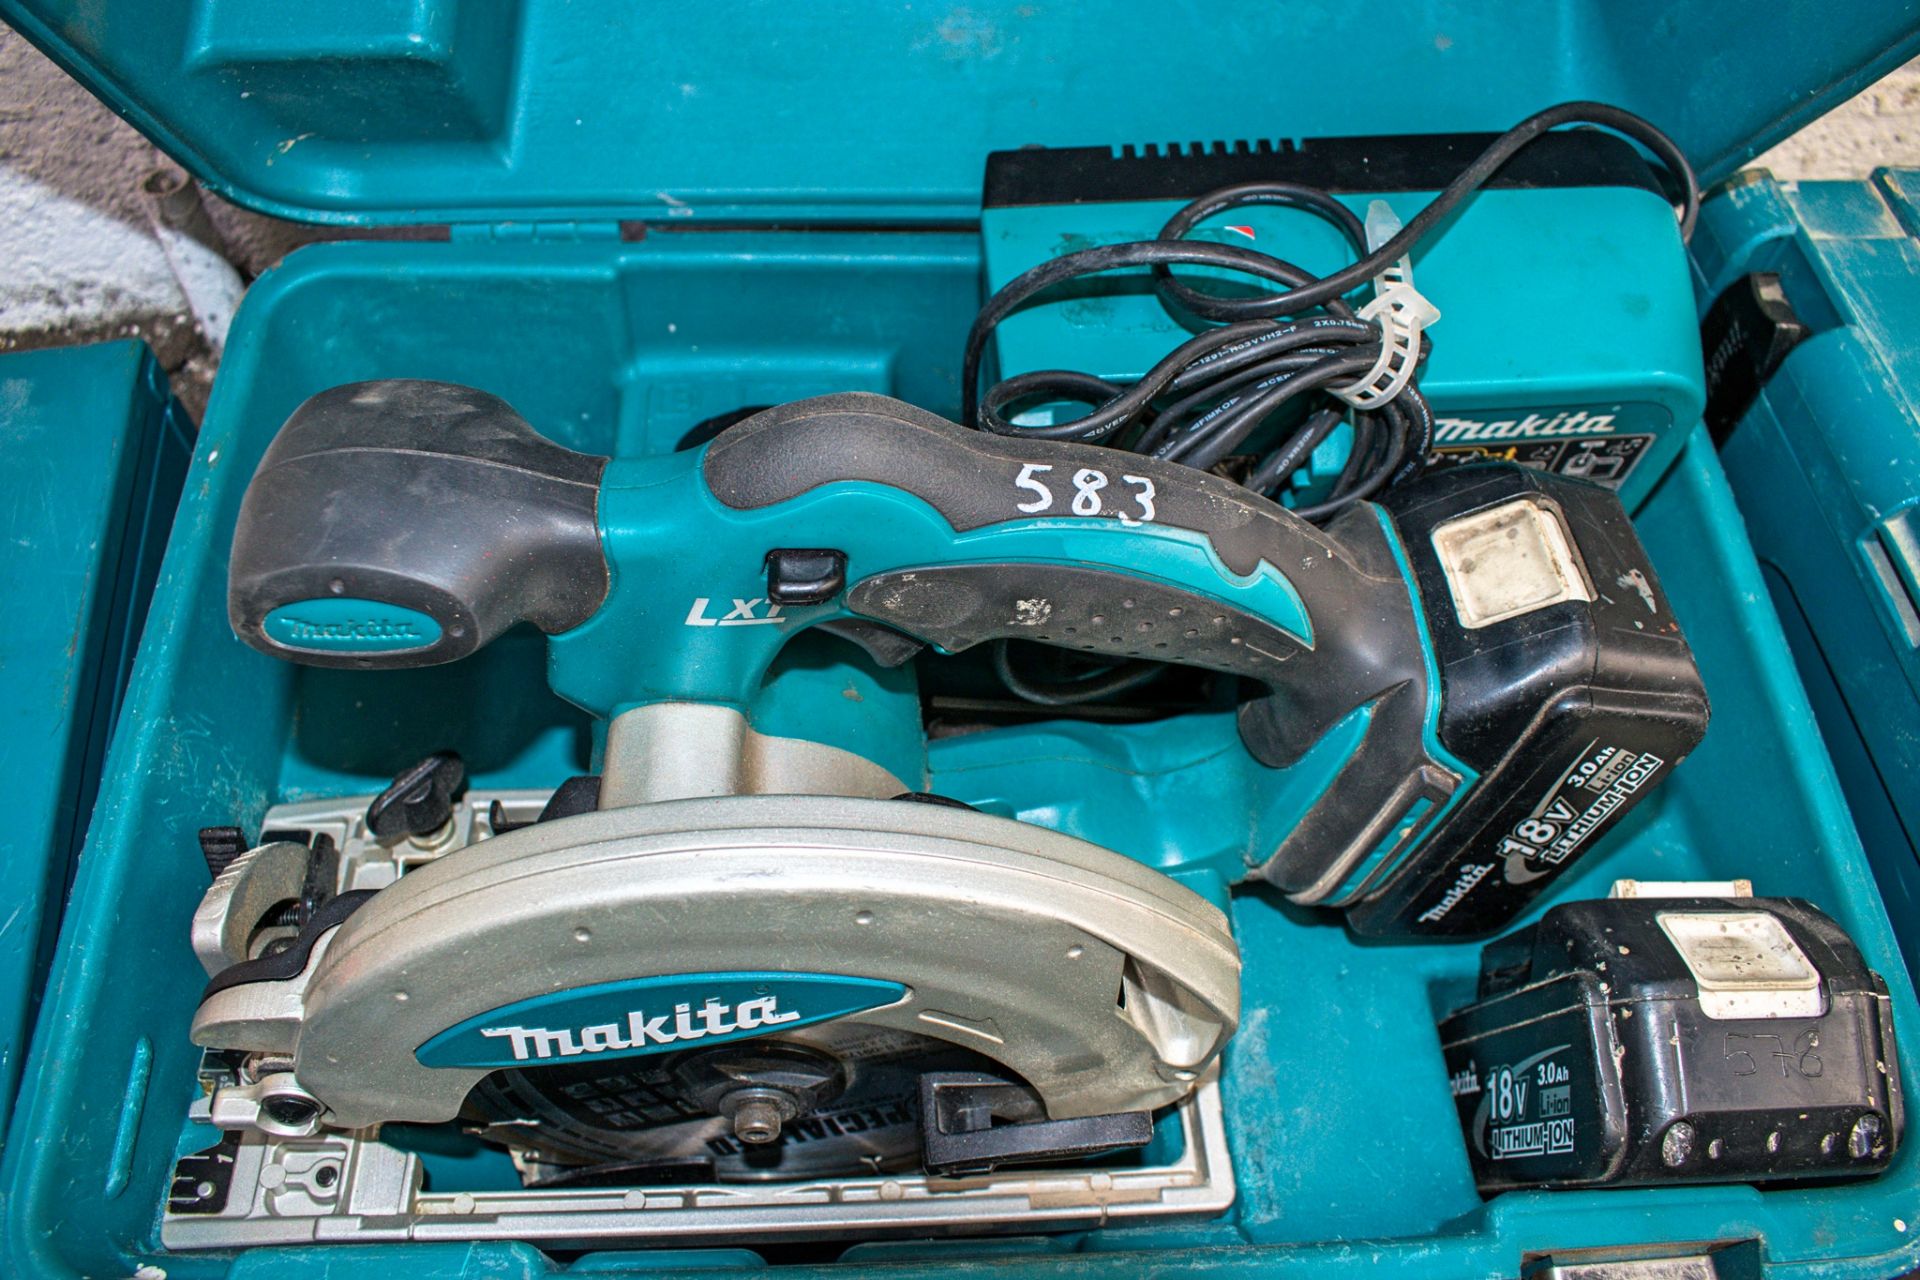 Makita 18v cordless circular saw c/w charger, 2 batteries & carry case A617975